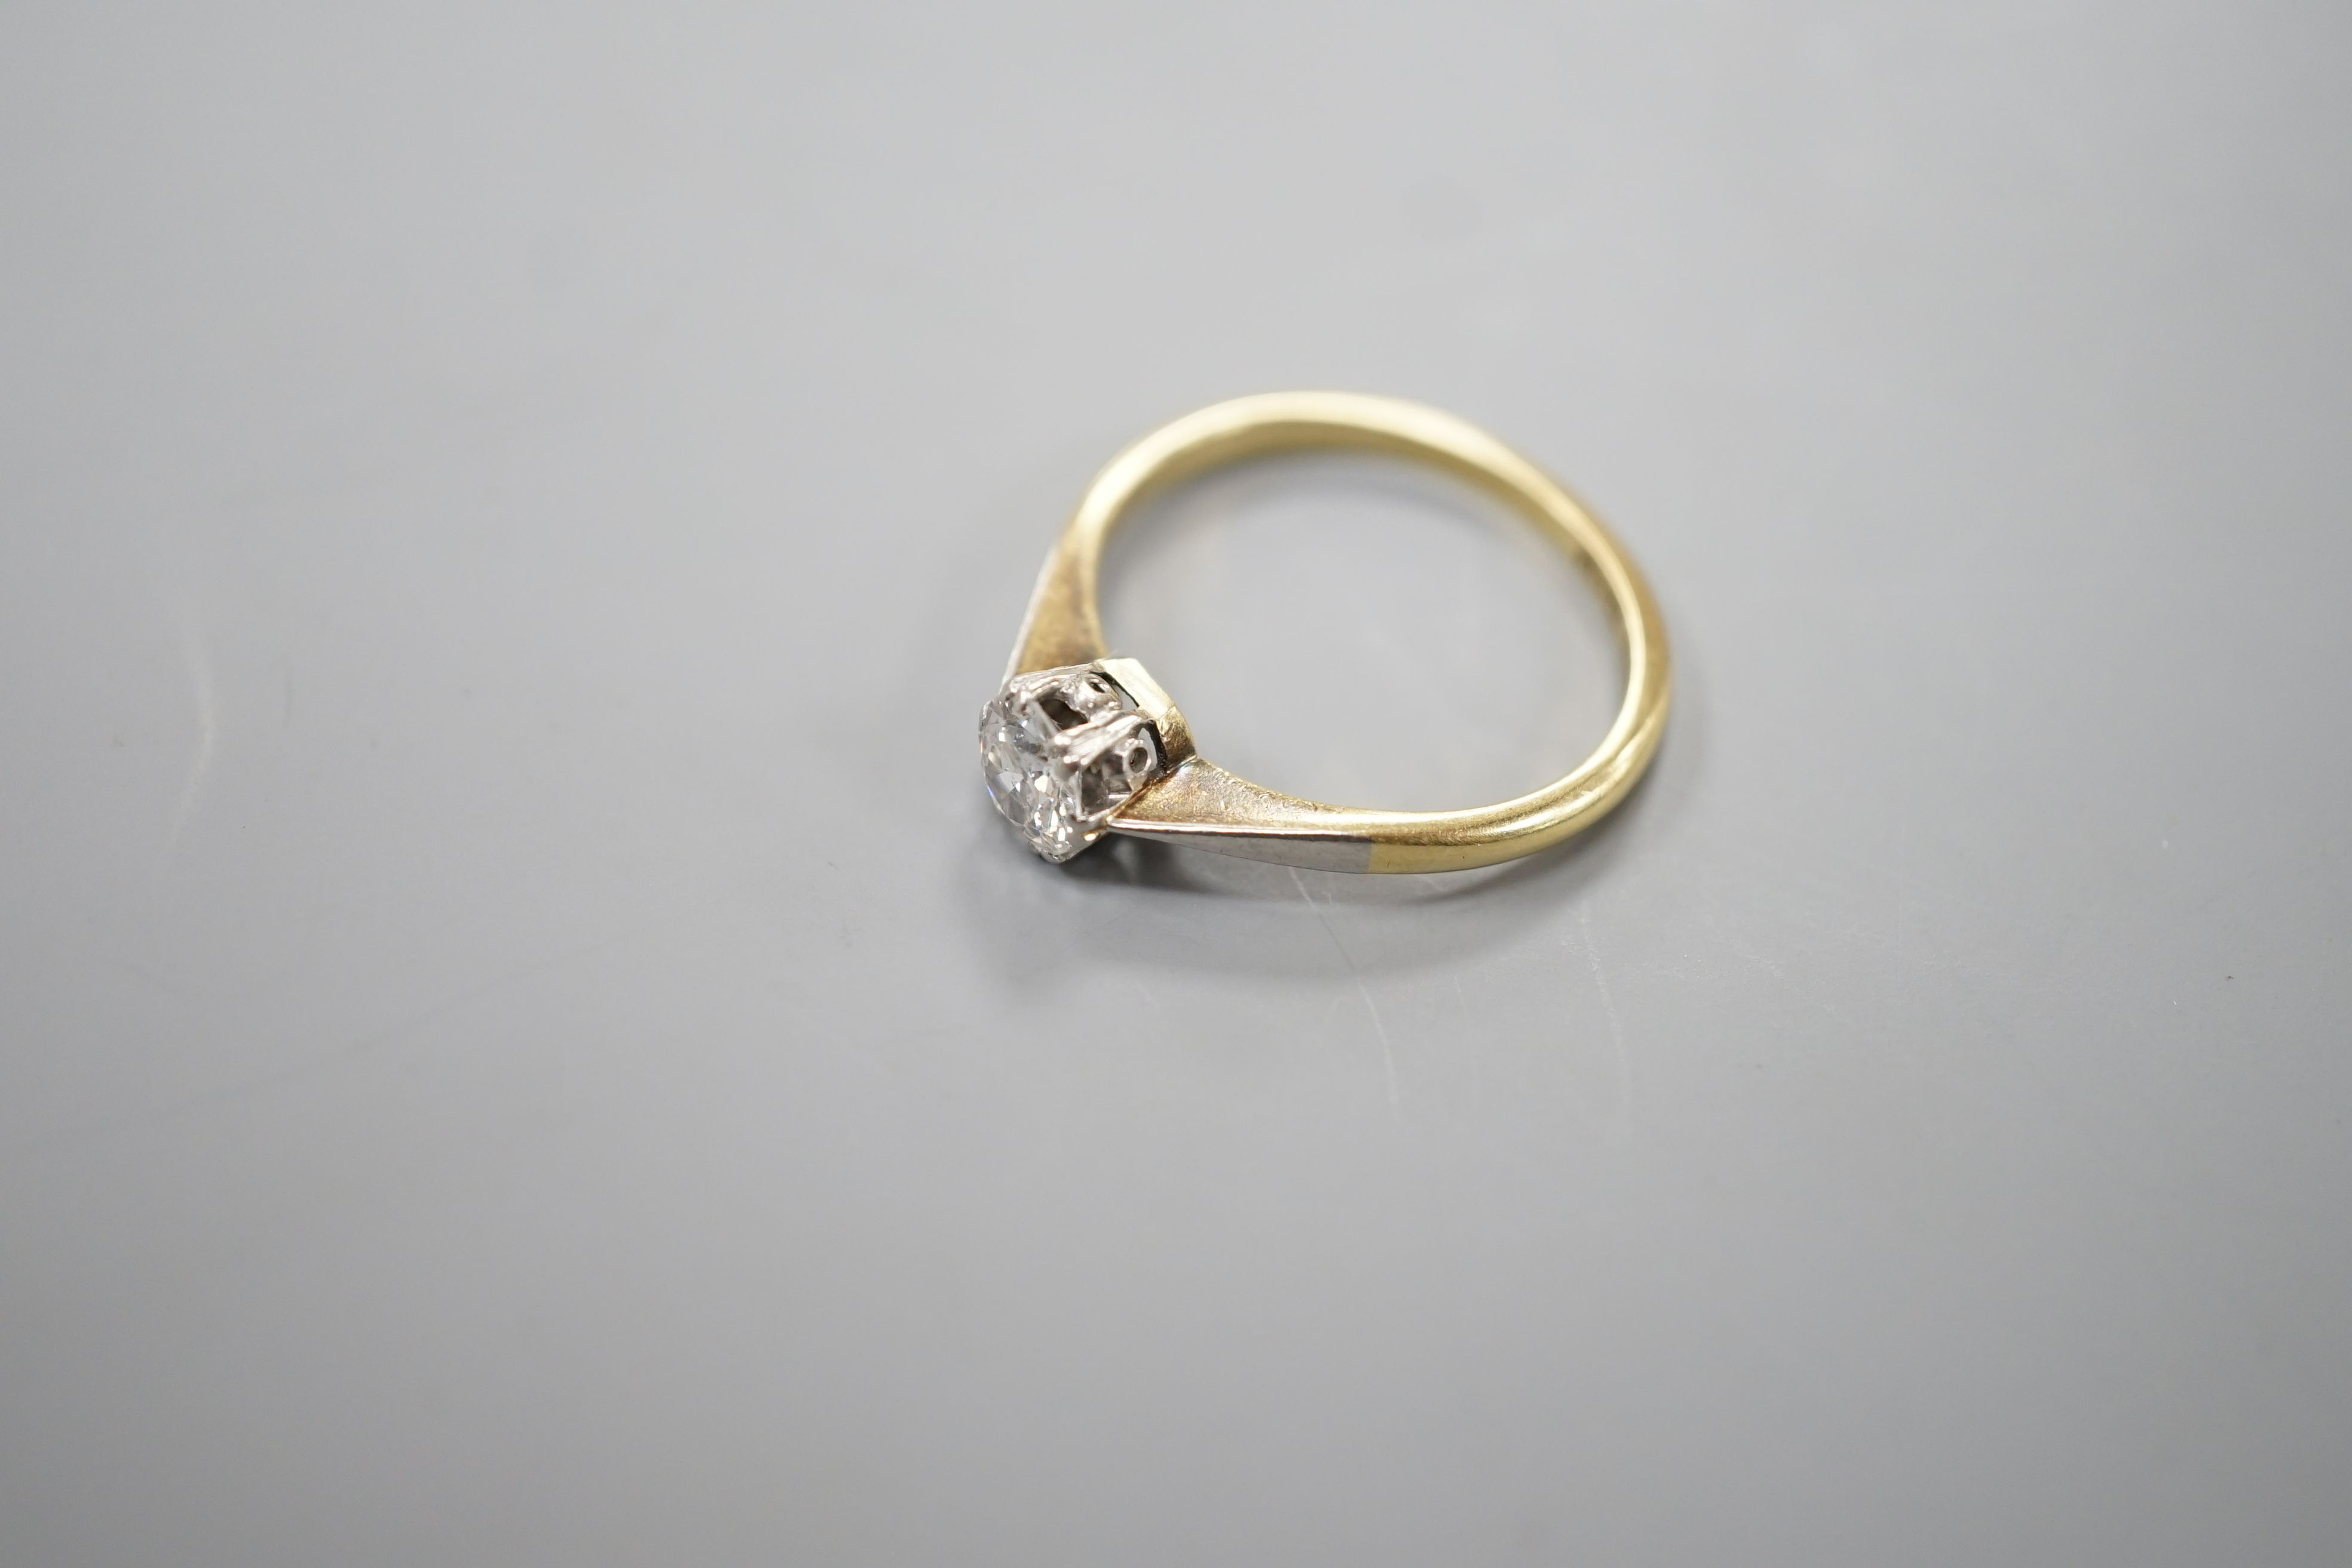 An 18ct gold and platinum solitaire diamond ring, the brilliant cut stone approximately 0.35cts, size M, gross 2.5 grams